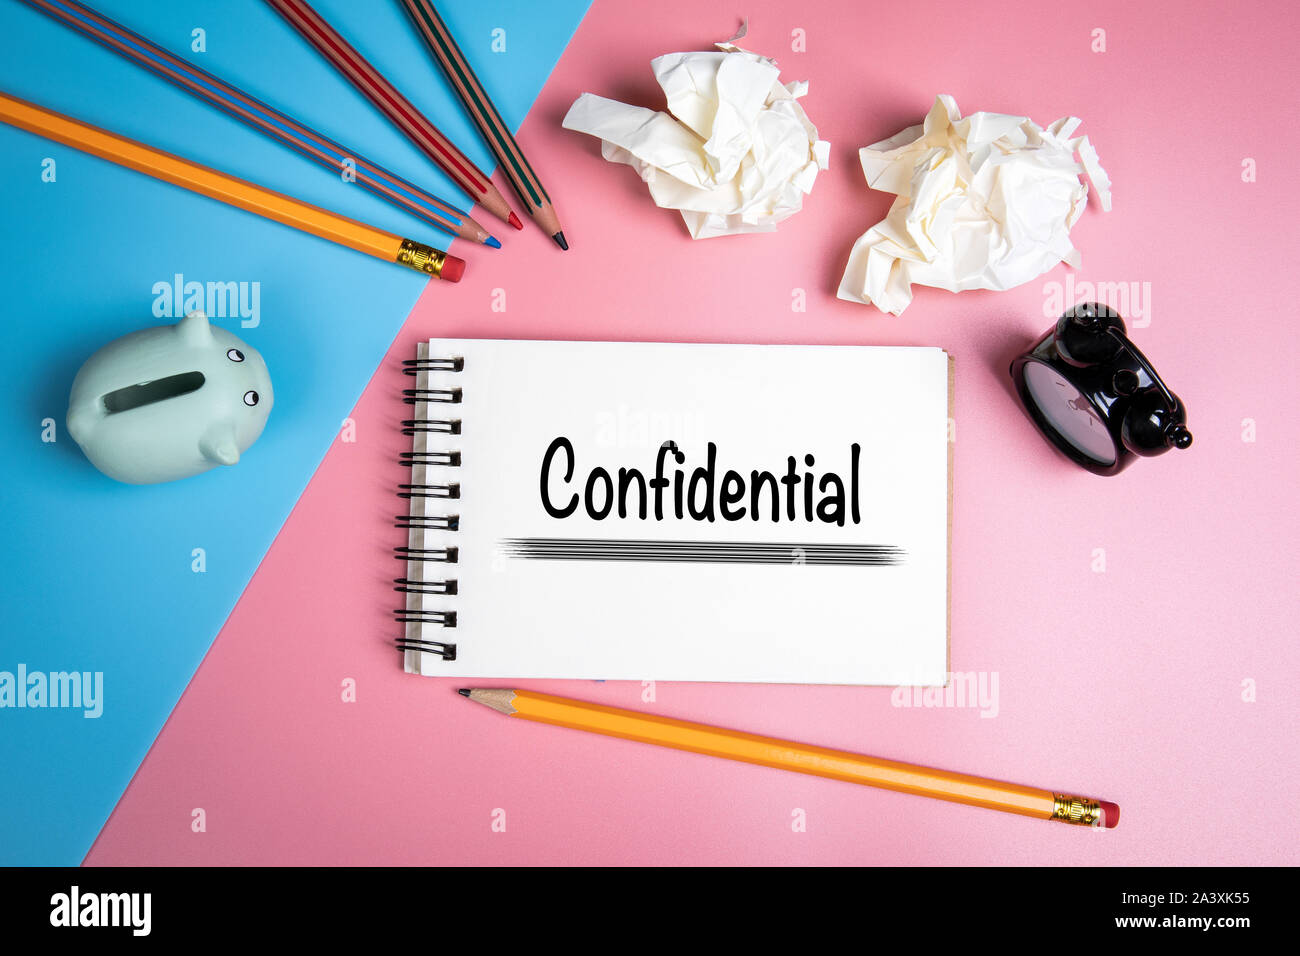 Confidential concept. Handwriting text in the notebook. Savings box and stationery Stock Photo